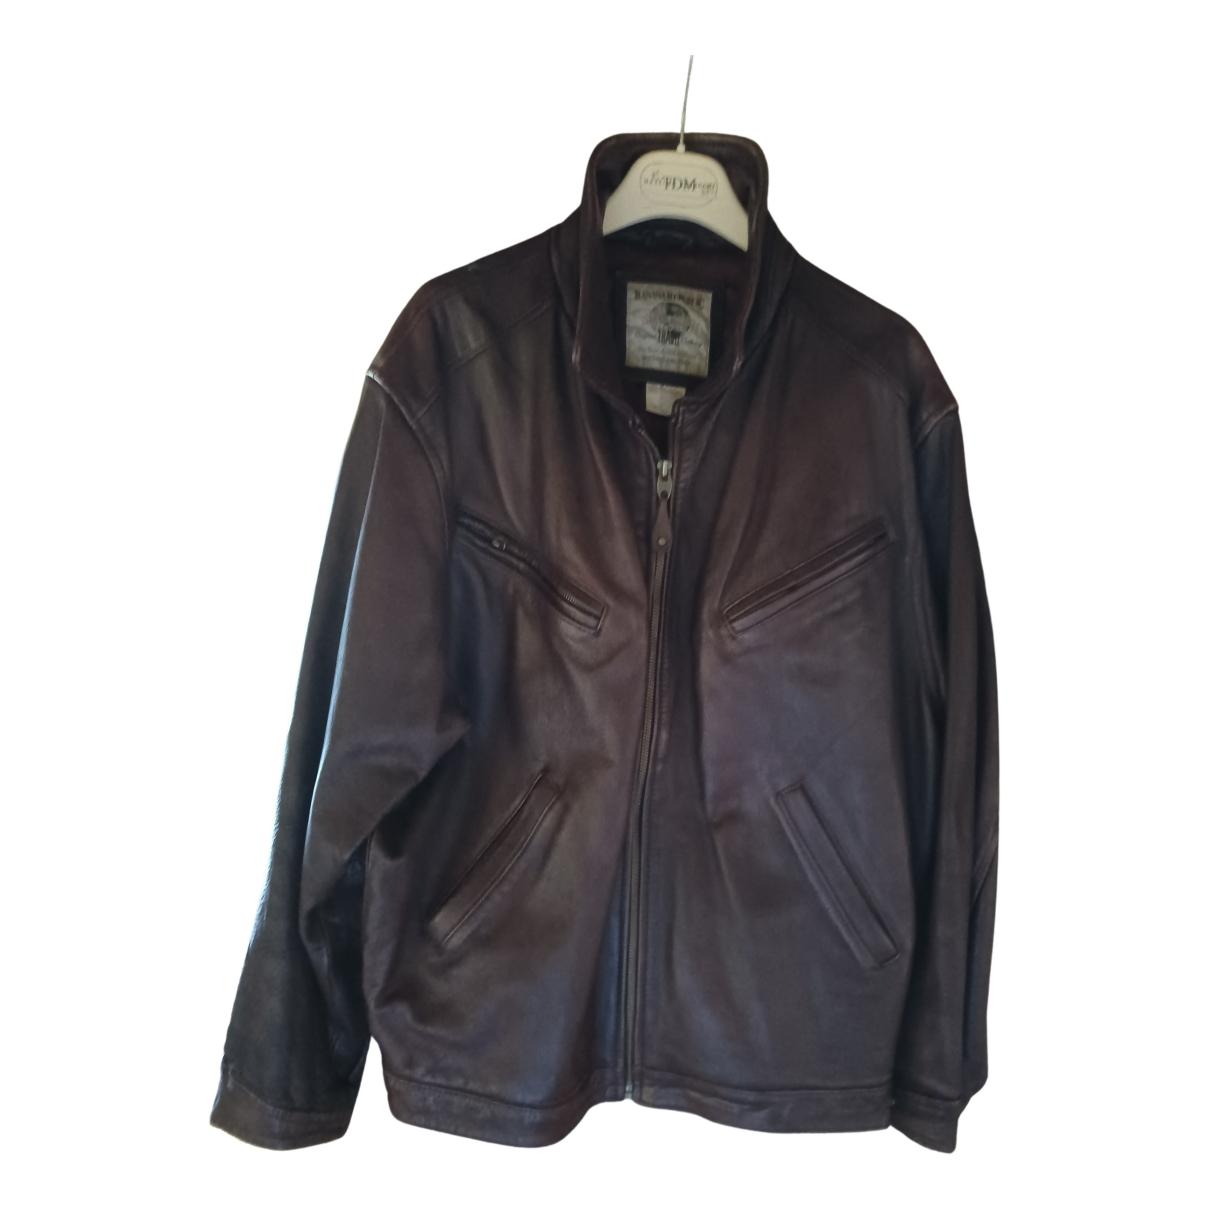 Leather jacket Banana Republic Brown size M International in